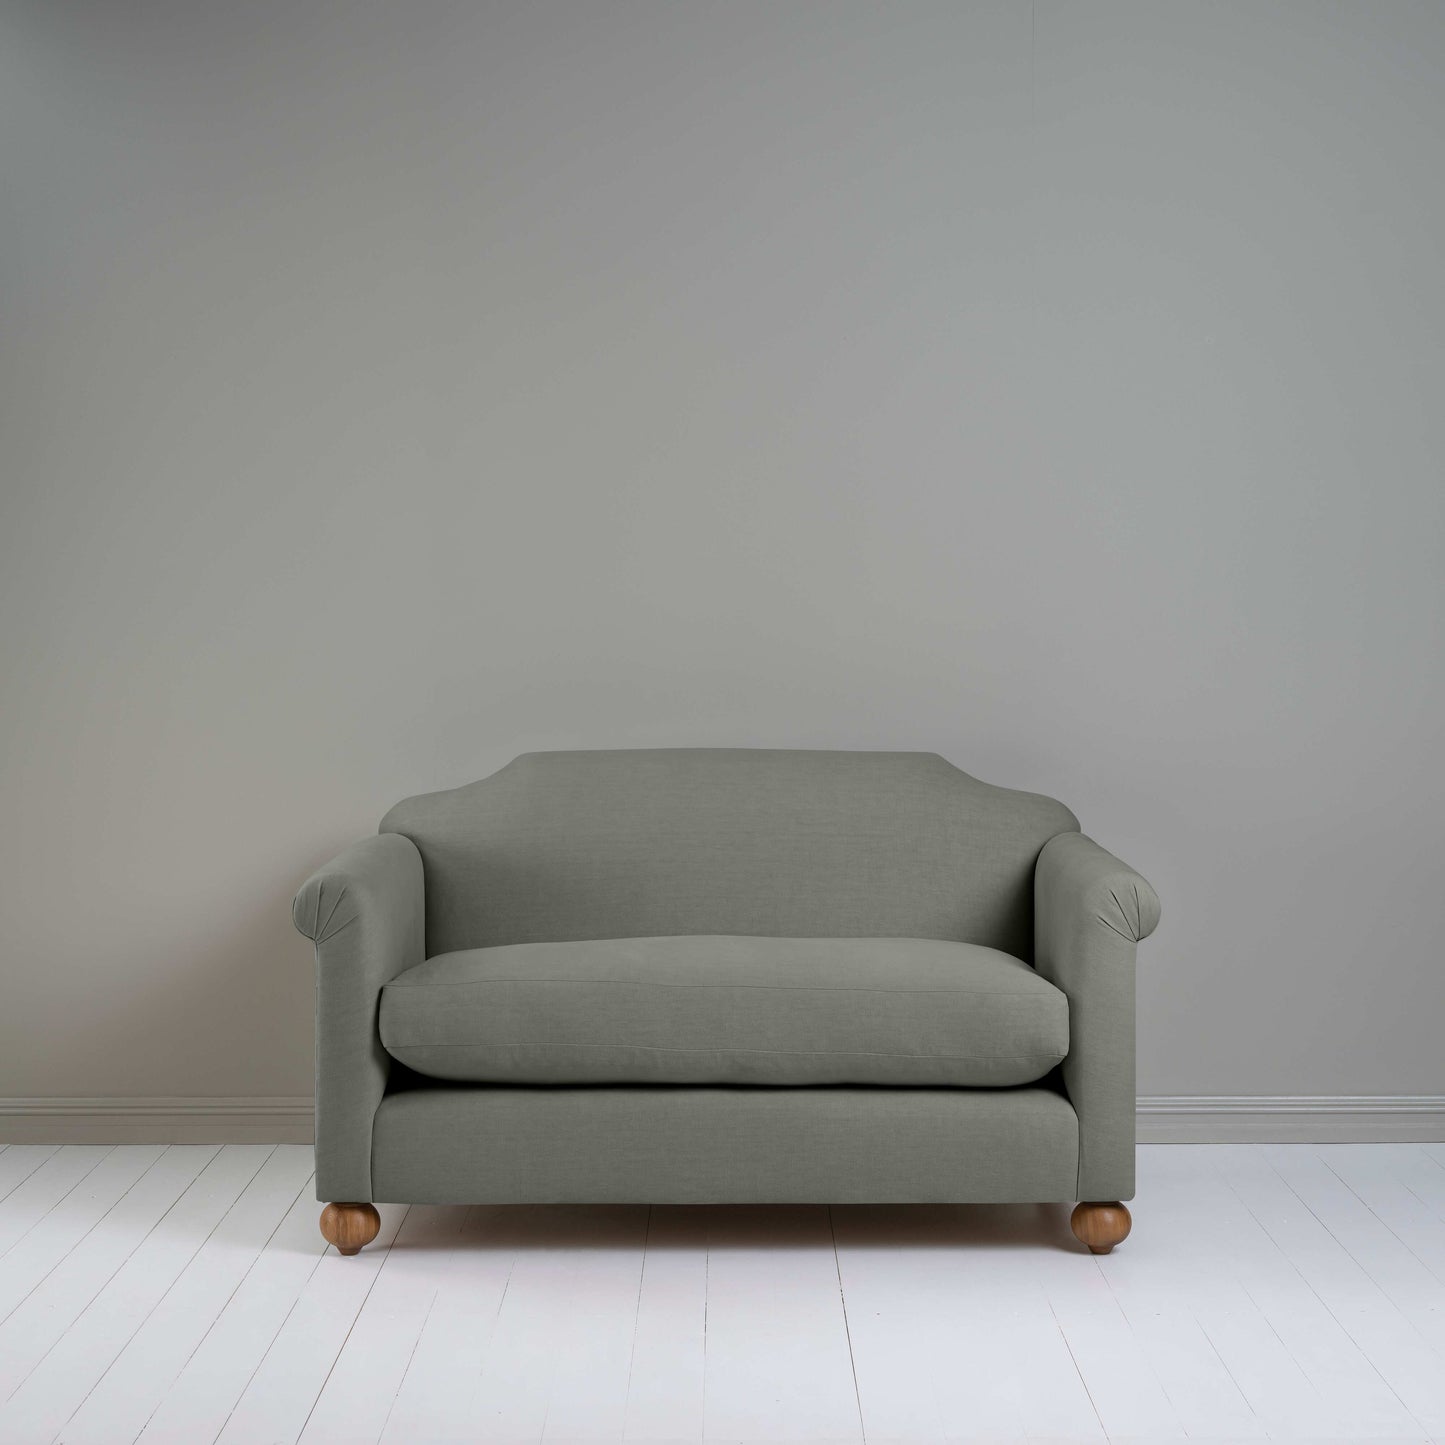 Dolittle 2 Seater Sofa in Laidback Linen Shadow